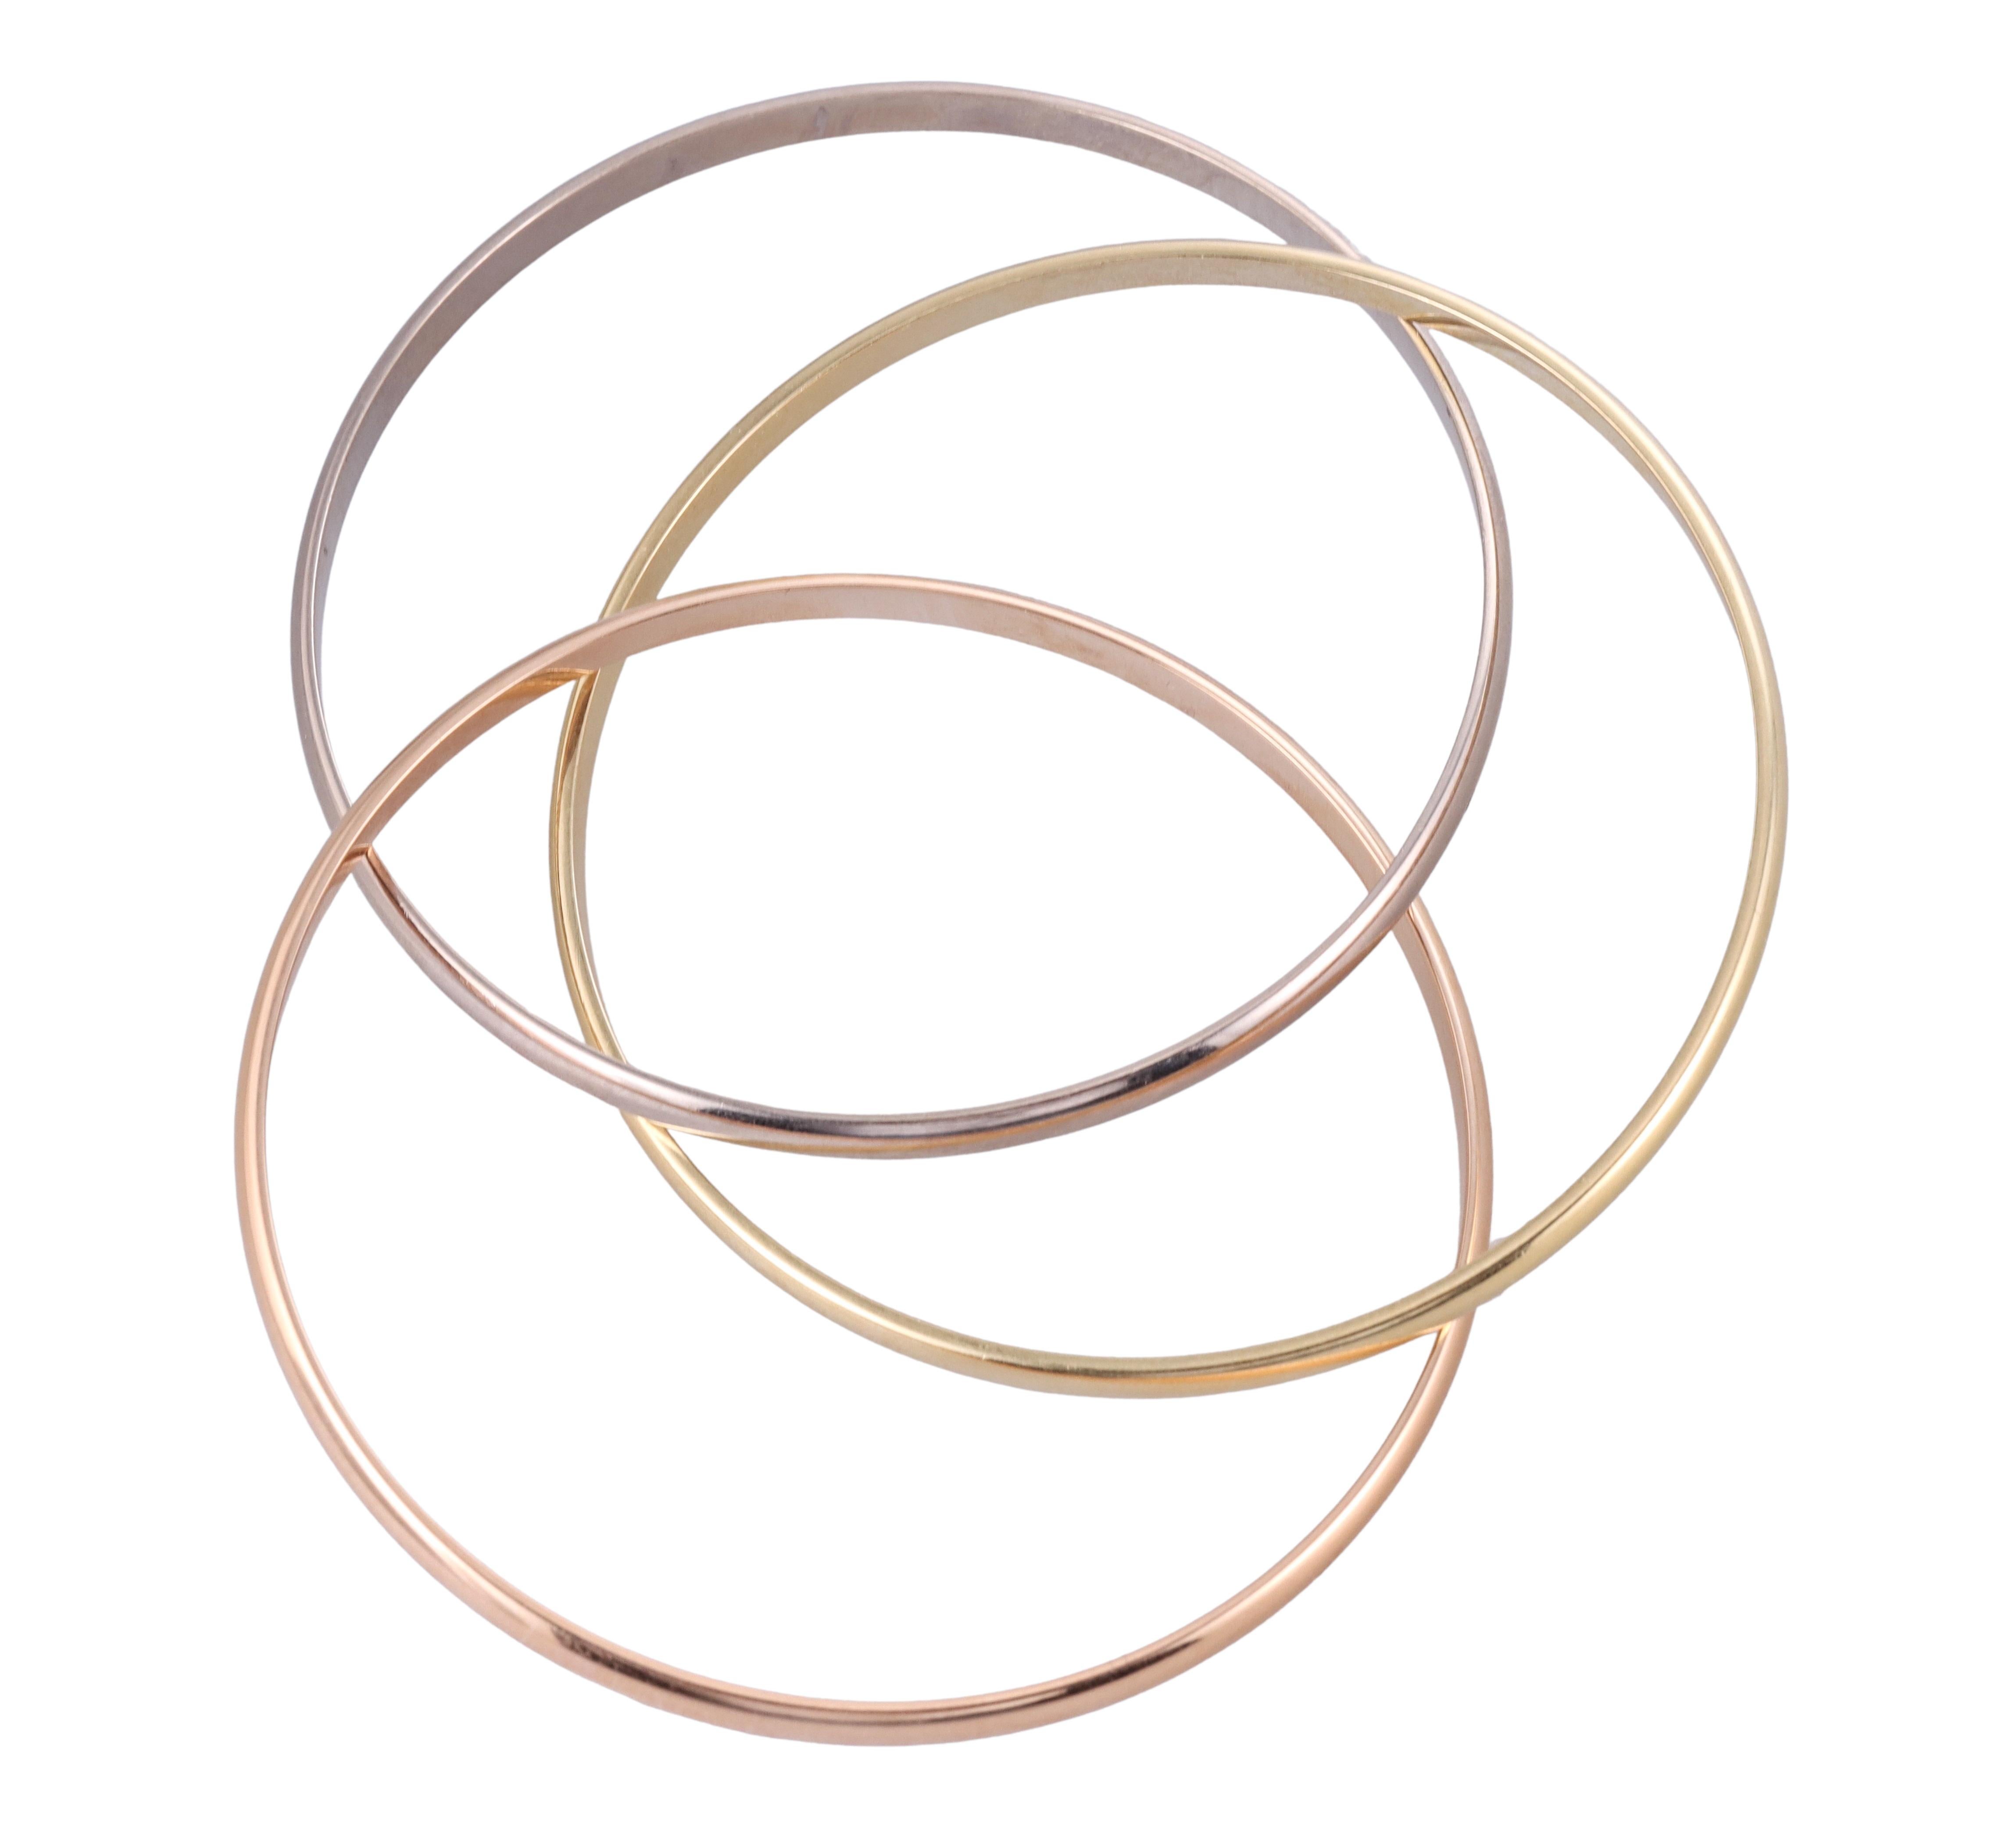 Iconic Trinity bangle bracelet by Cartier, set in traditional 18k rose, white and yellow color gold. Bracelet will fit an approximately 7